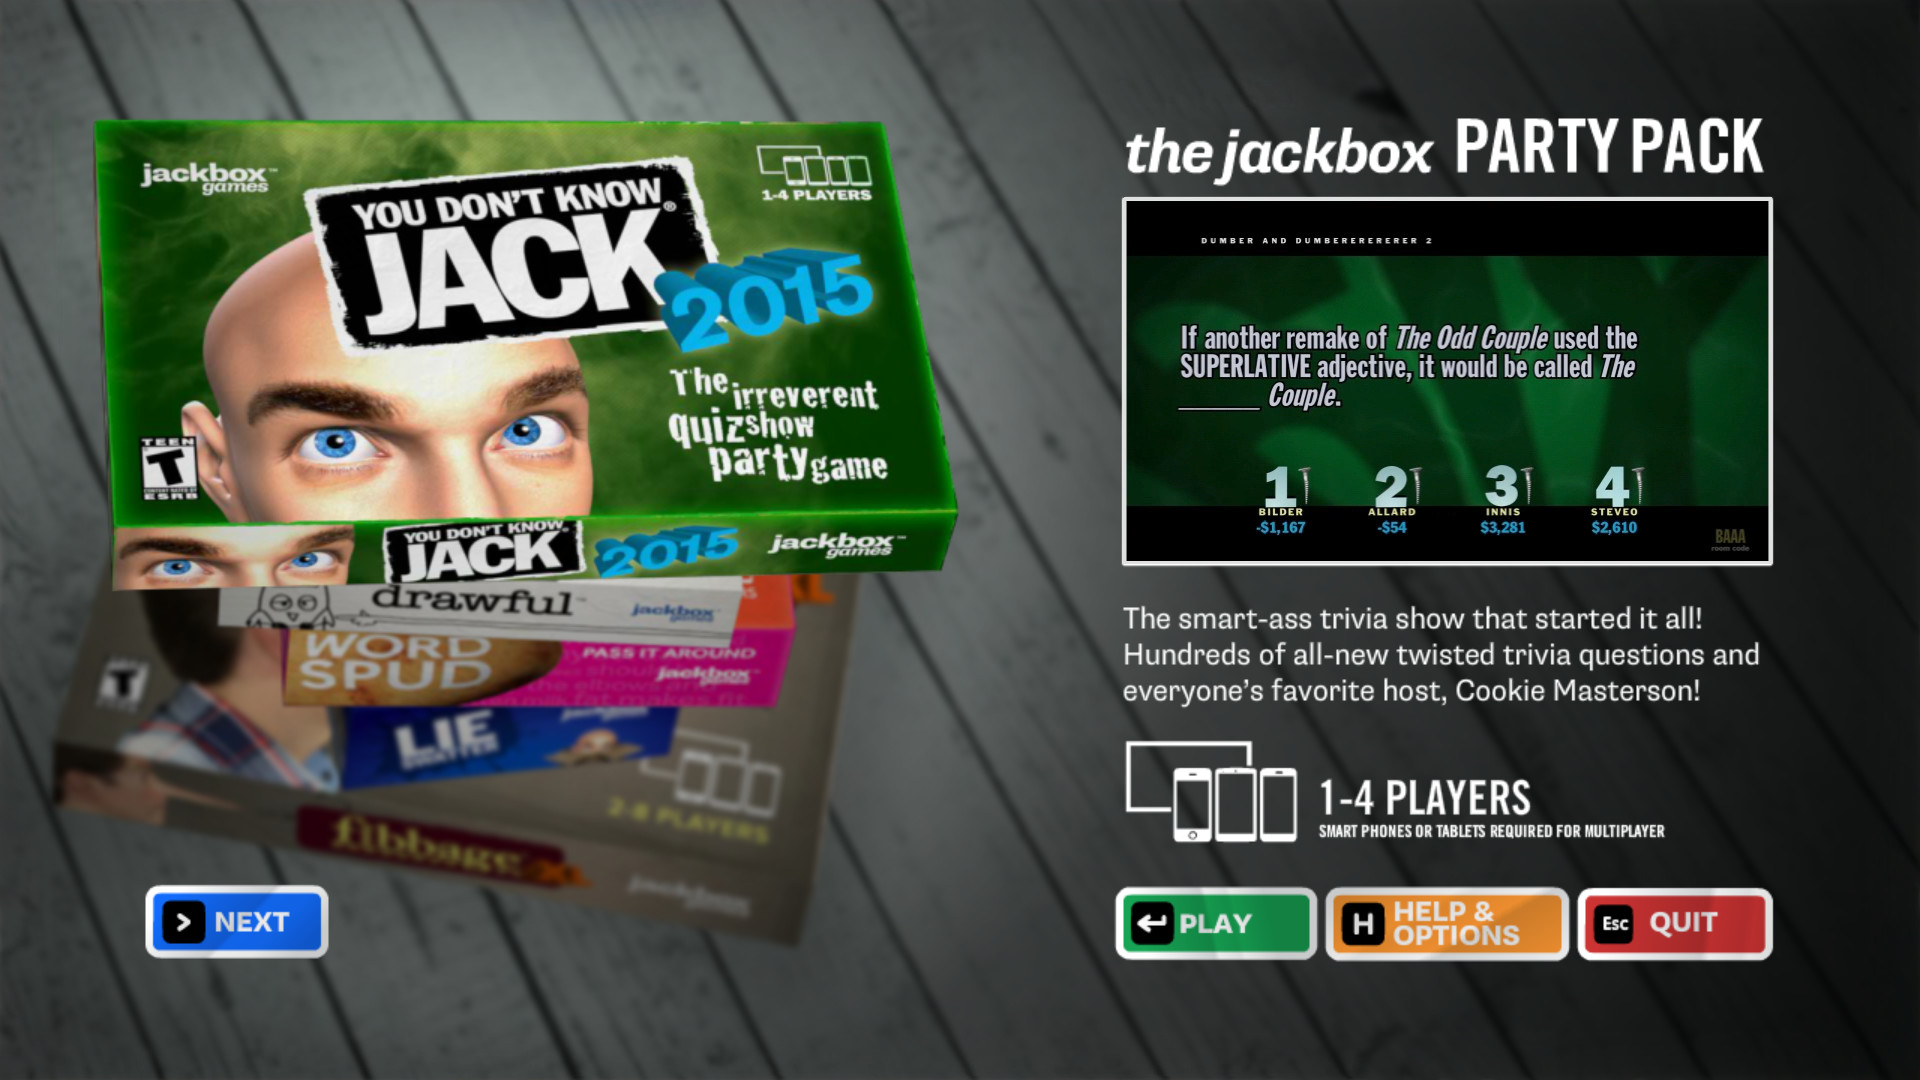 earwax the jackbox party pack 2 soundtrack